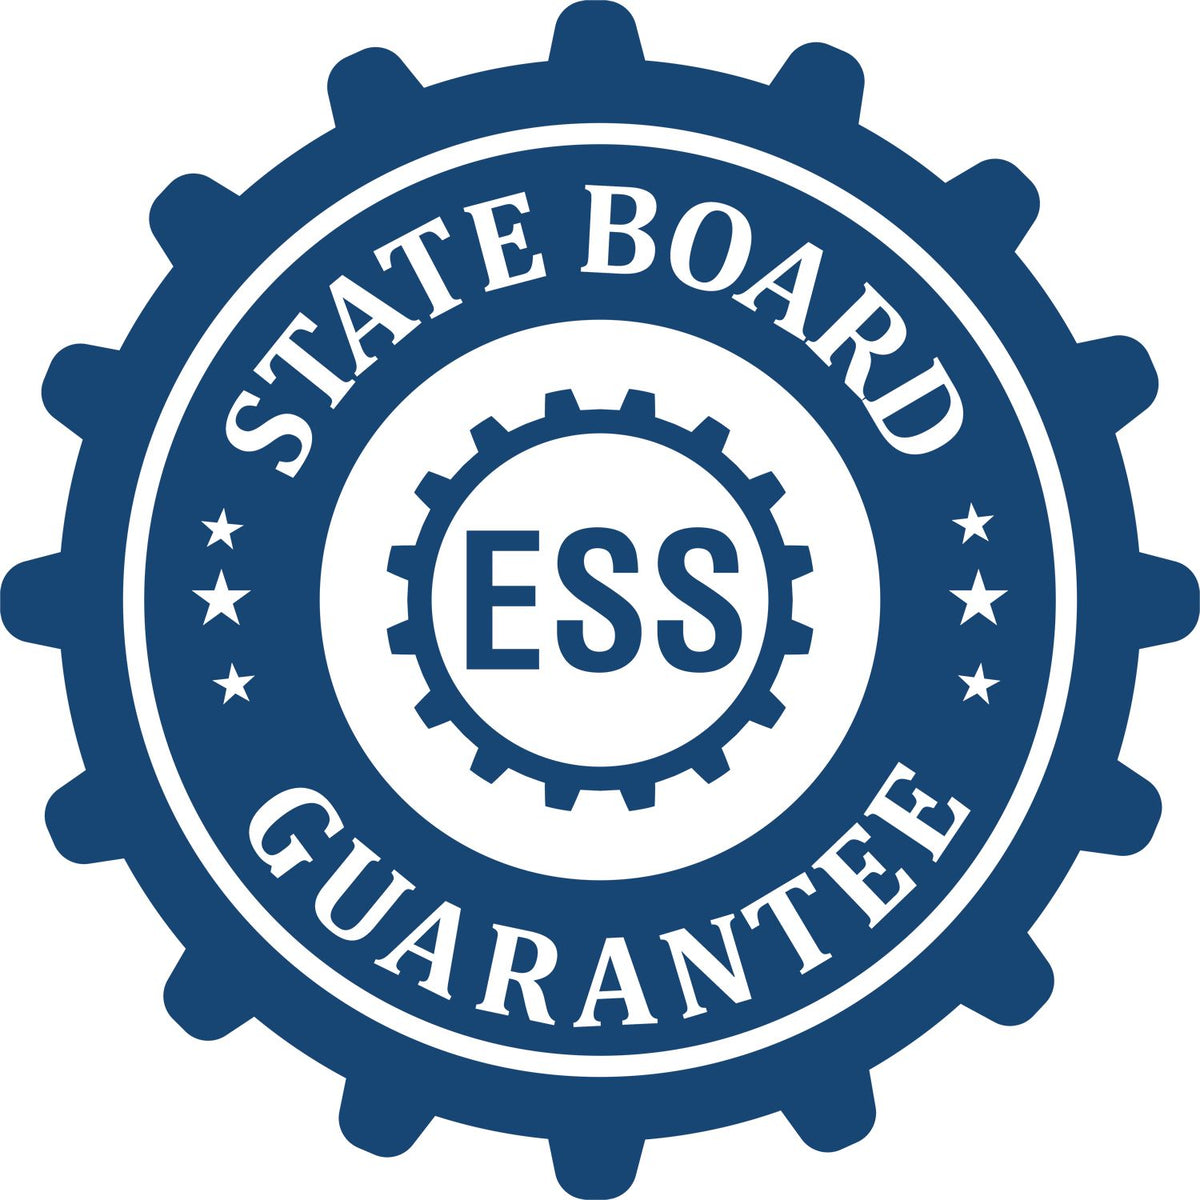 An emblem in a gear shape illustrating a state board guarantee for the Hybrid Delaware Engineer Seal